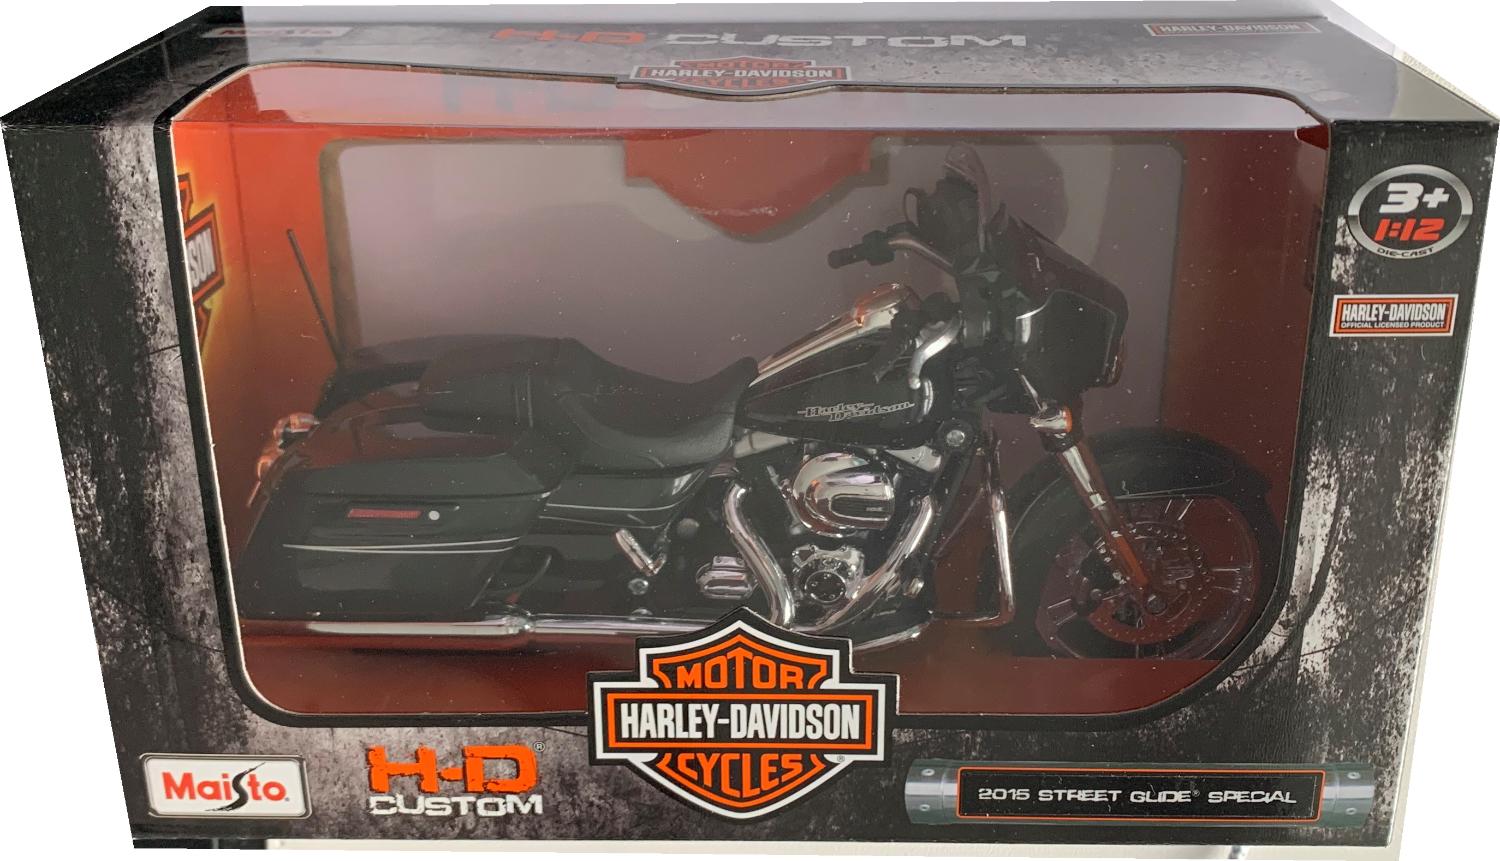 Harley Davidson 2015 Street Glide Special in black 1:12 scale model from Maisto